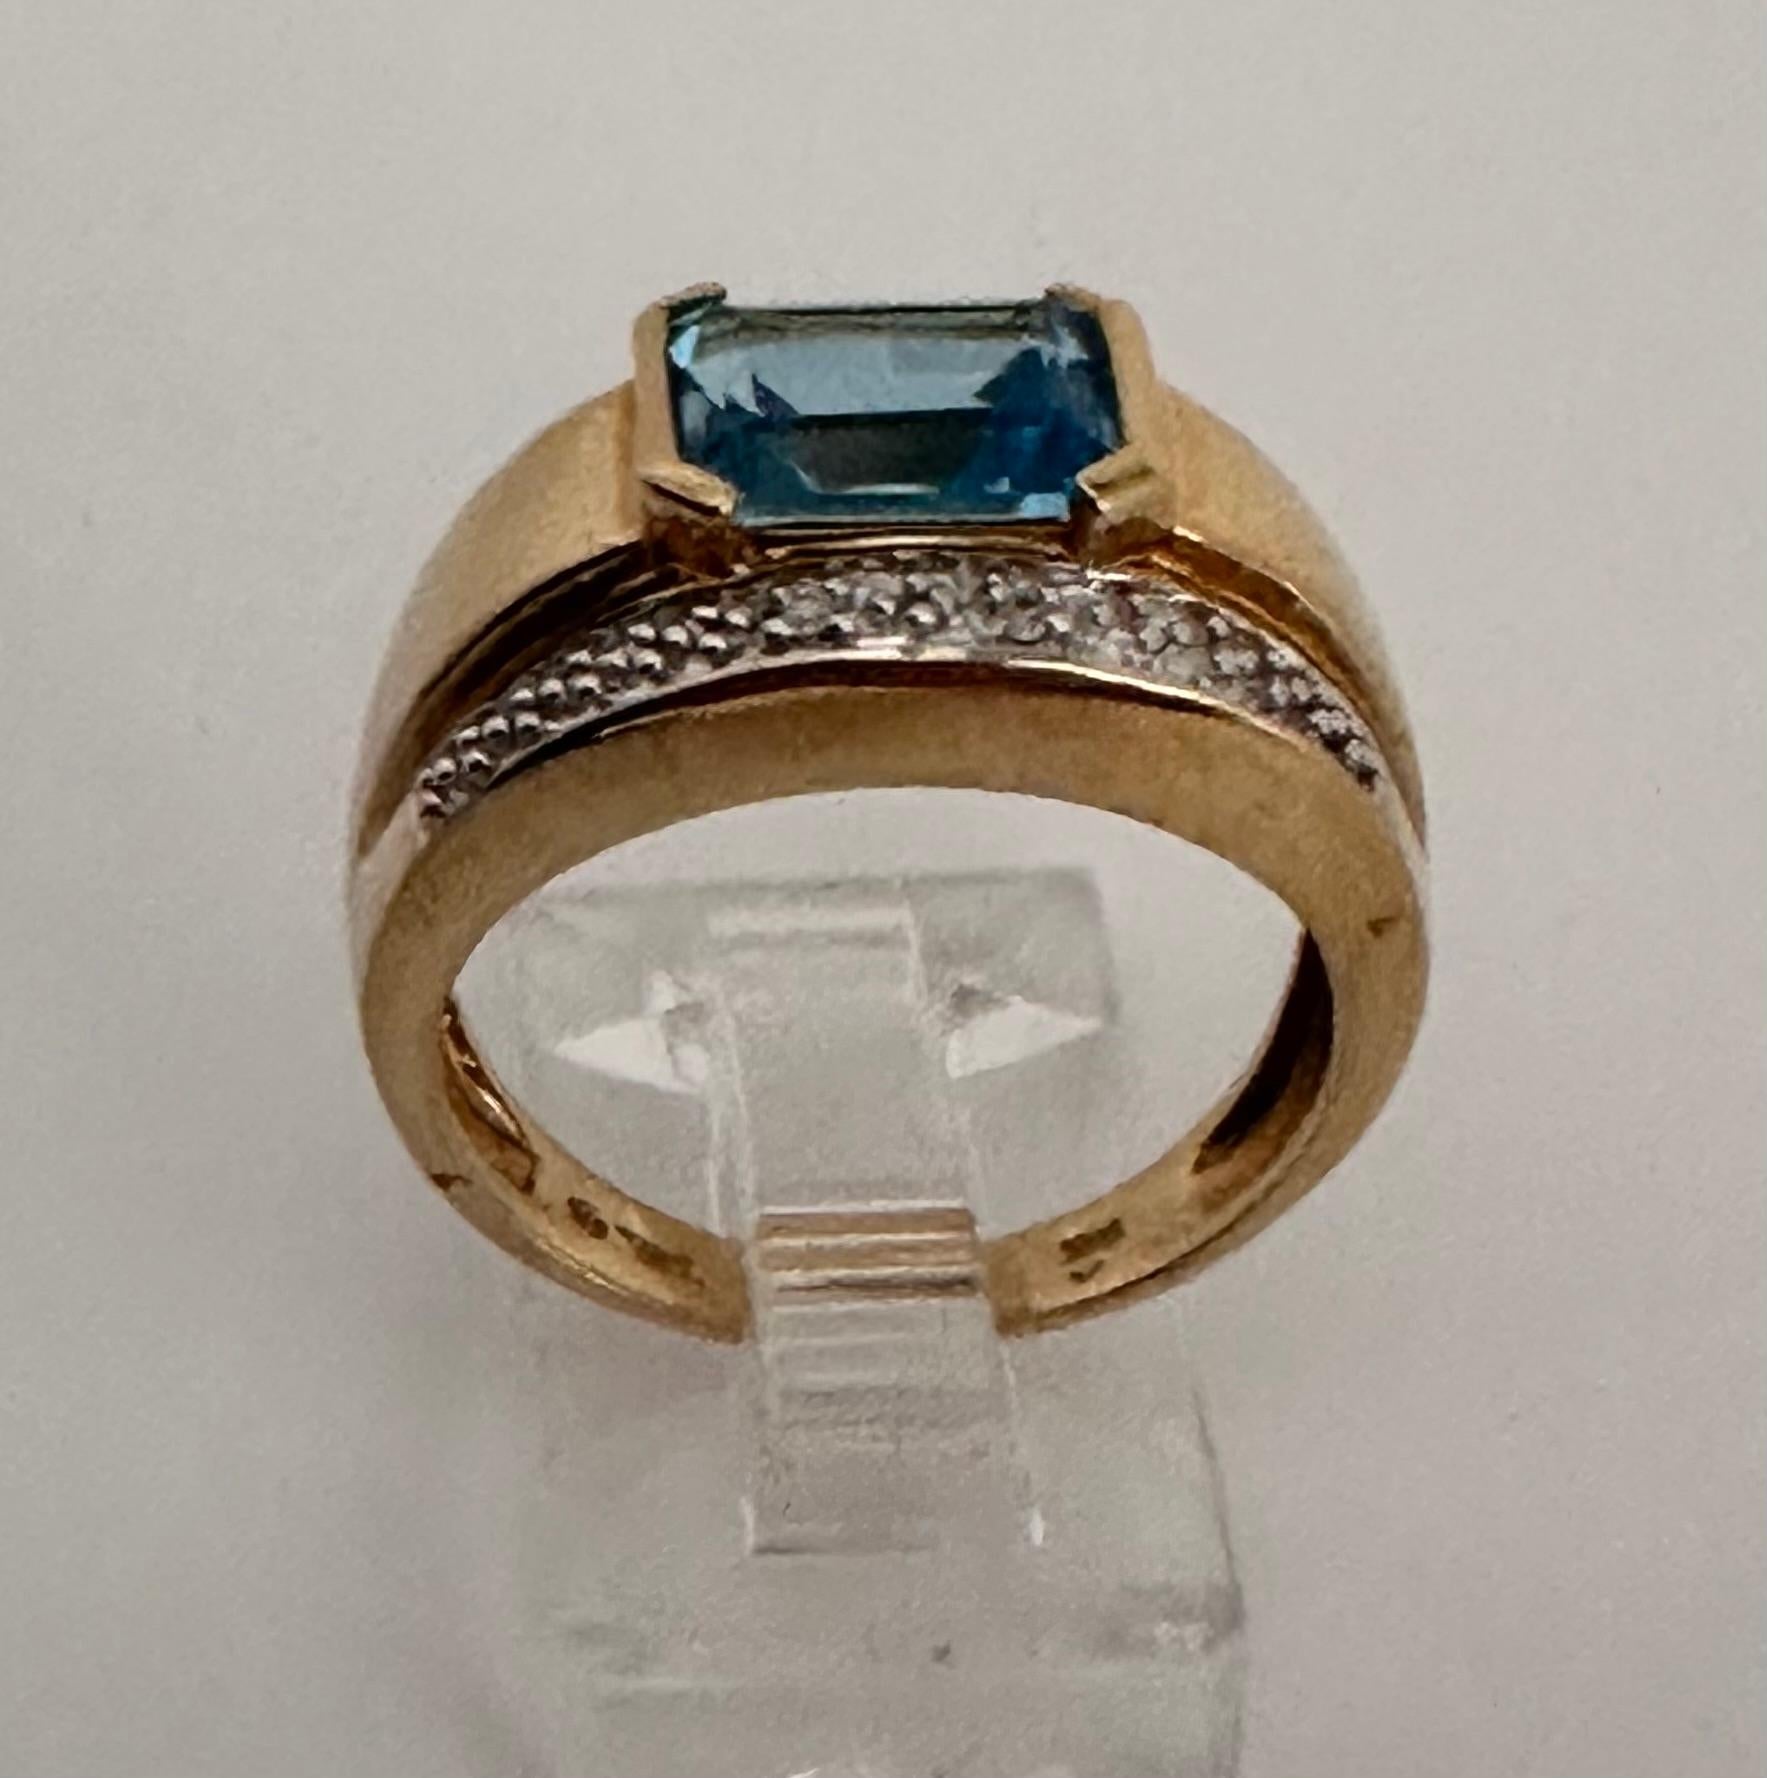 10k Yellow Gold 6mm x 8mm Emerald Cut Blue Topaz Diamond Ring Size 7 For Sale 4